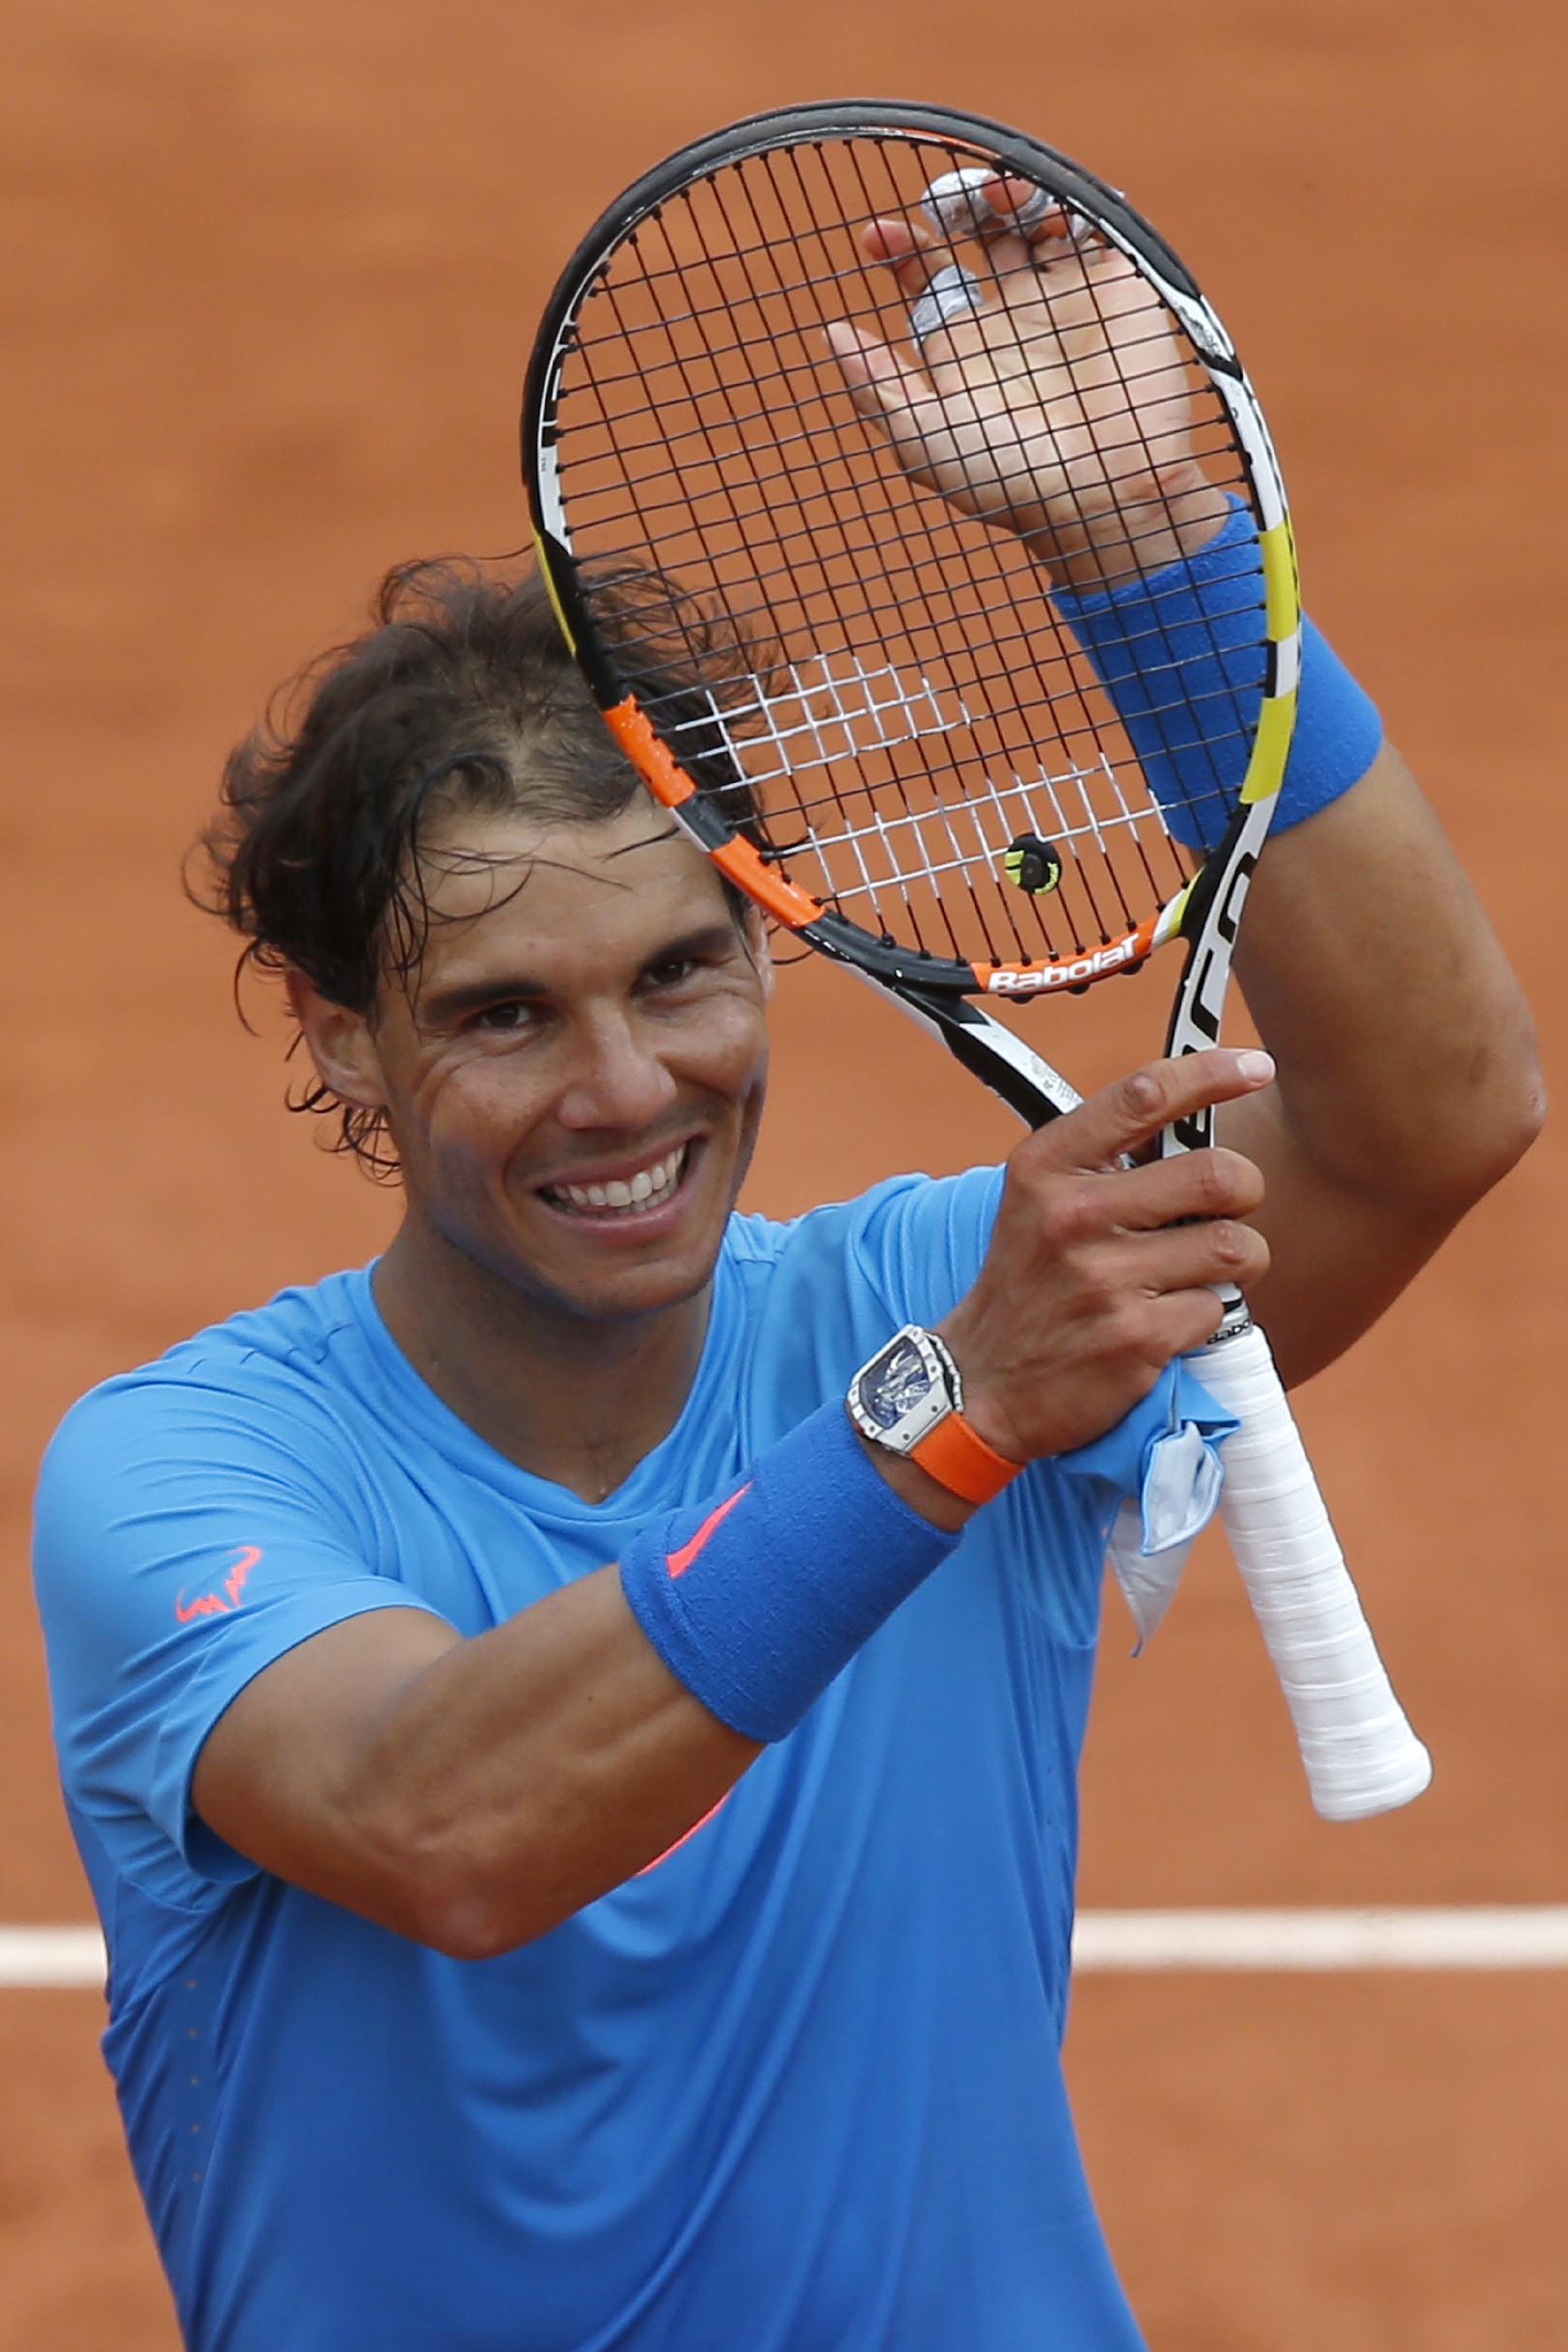 French Open: Rafael Nadal starts title defence with win [PHOTOS] – Rafael Nadal Fans1626 x 2439